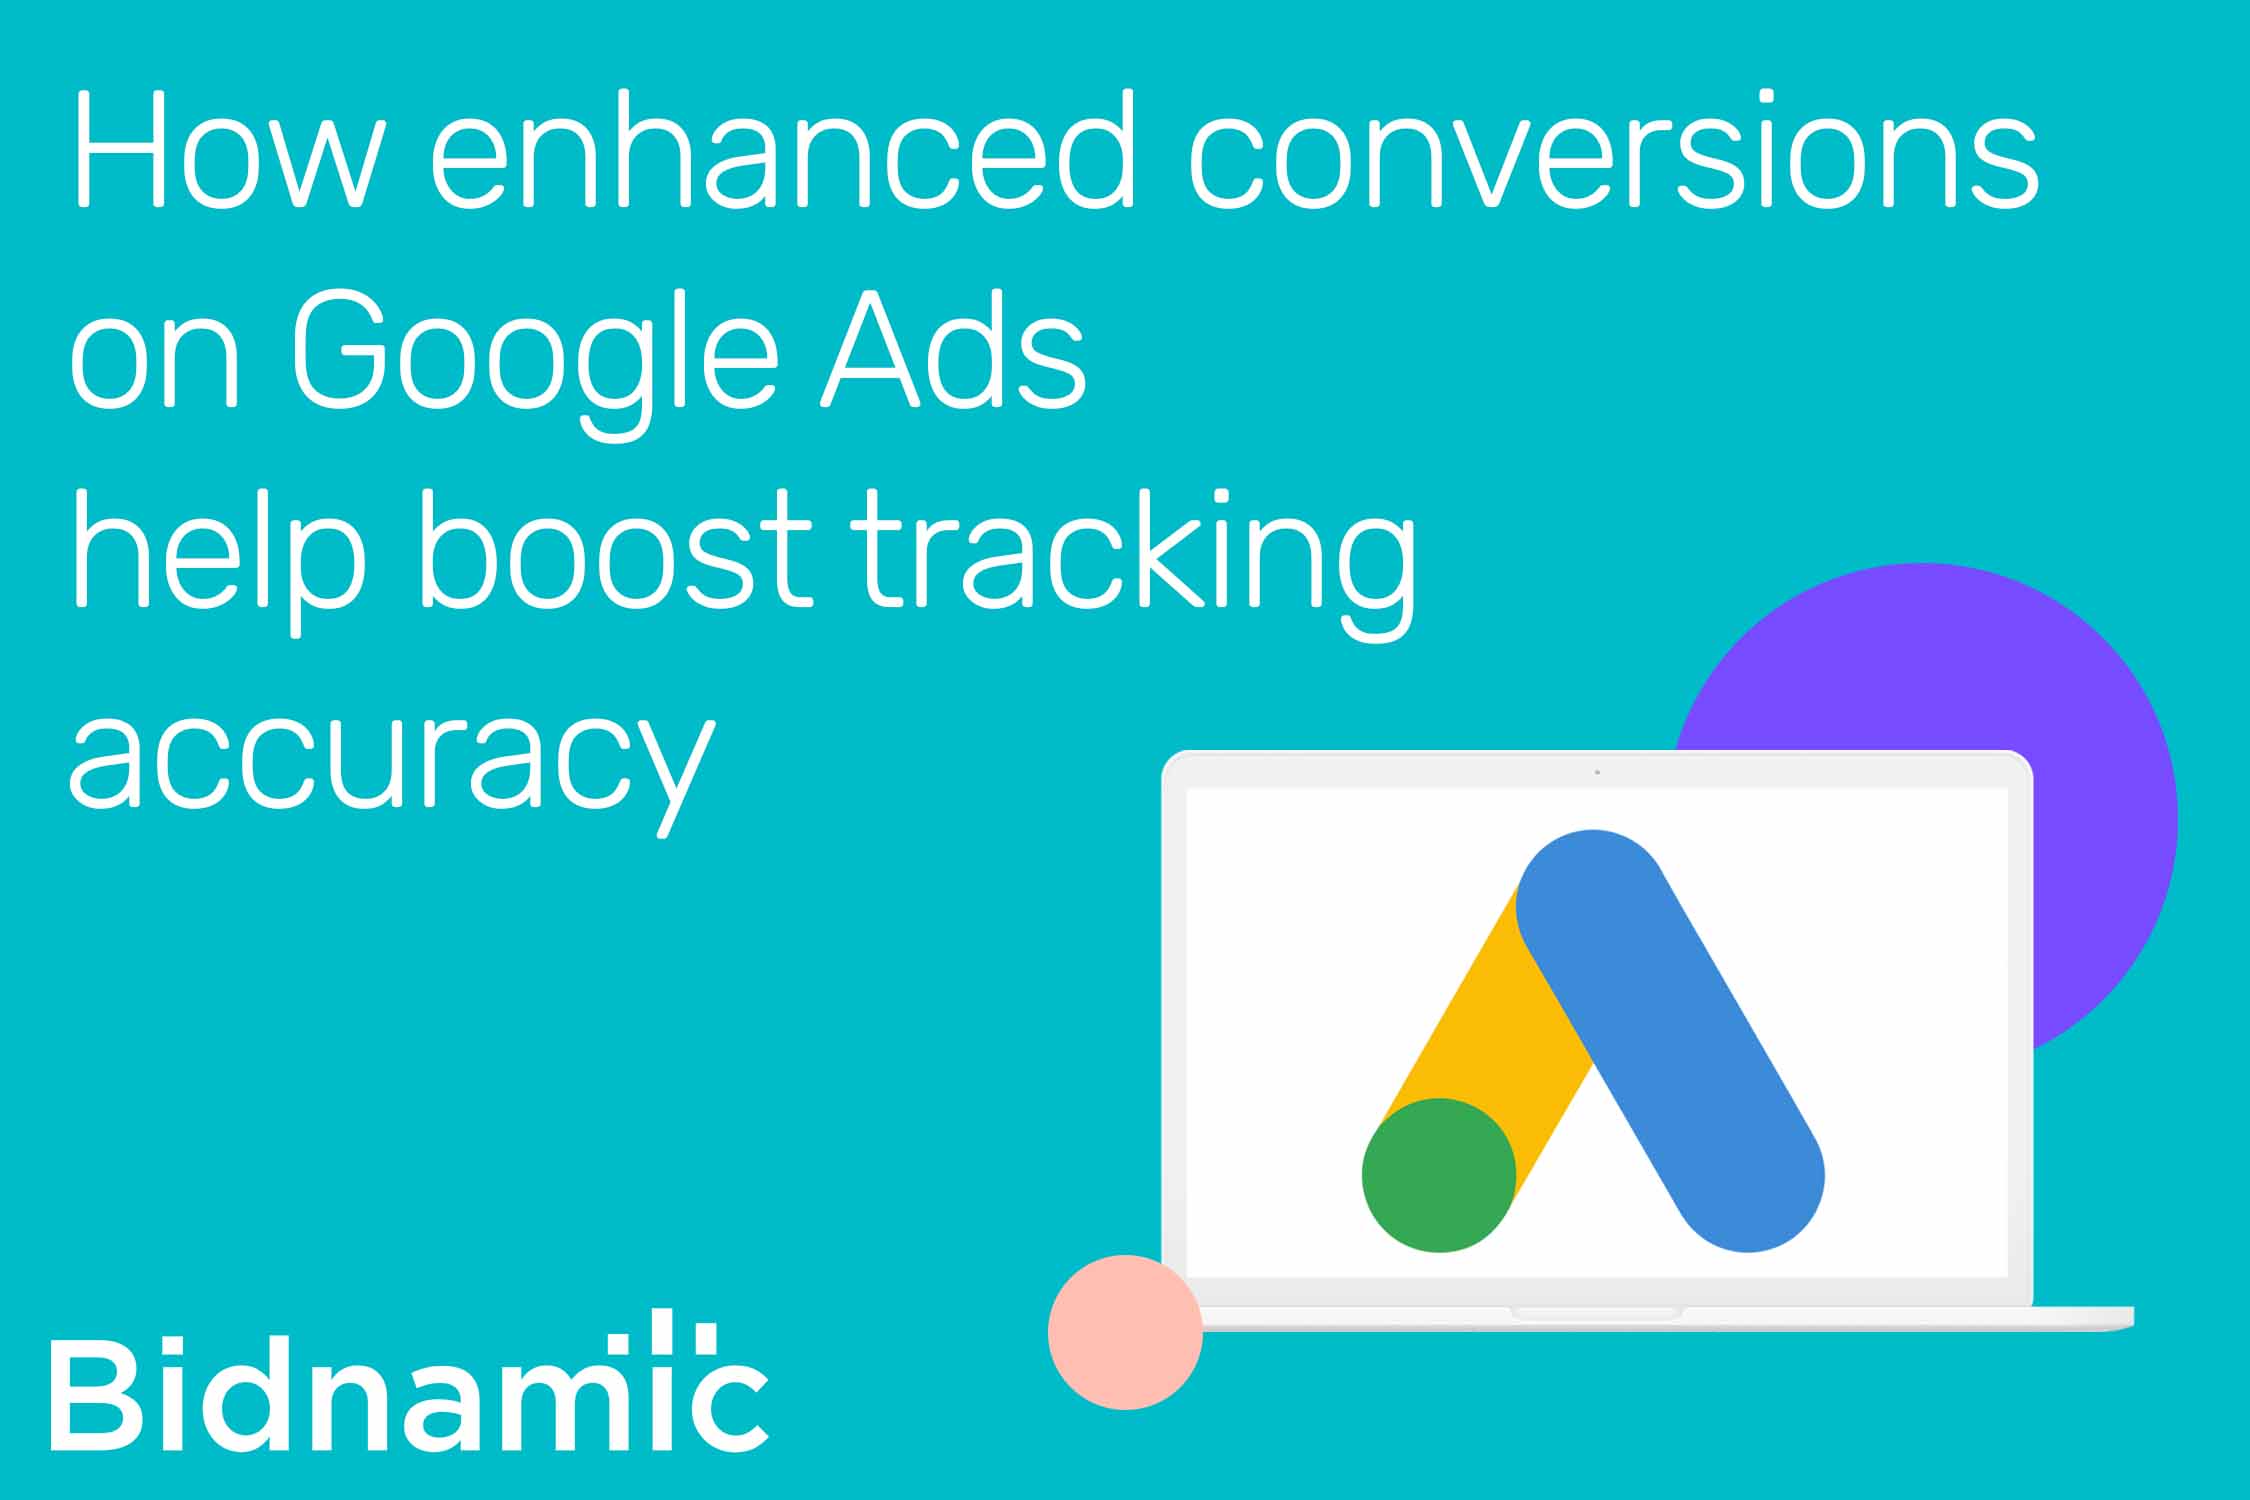 How enhanced conversions on Google Ads help boost tracking accuracy